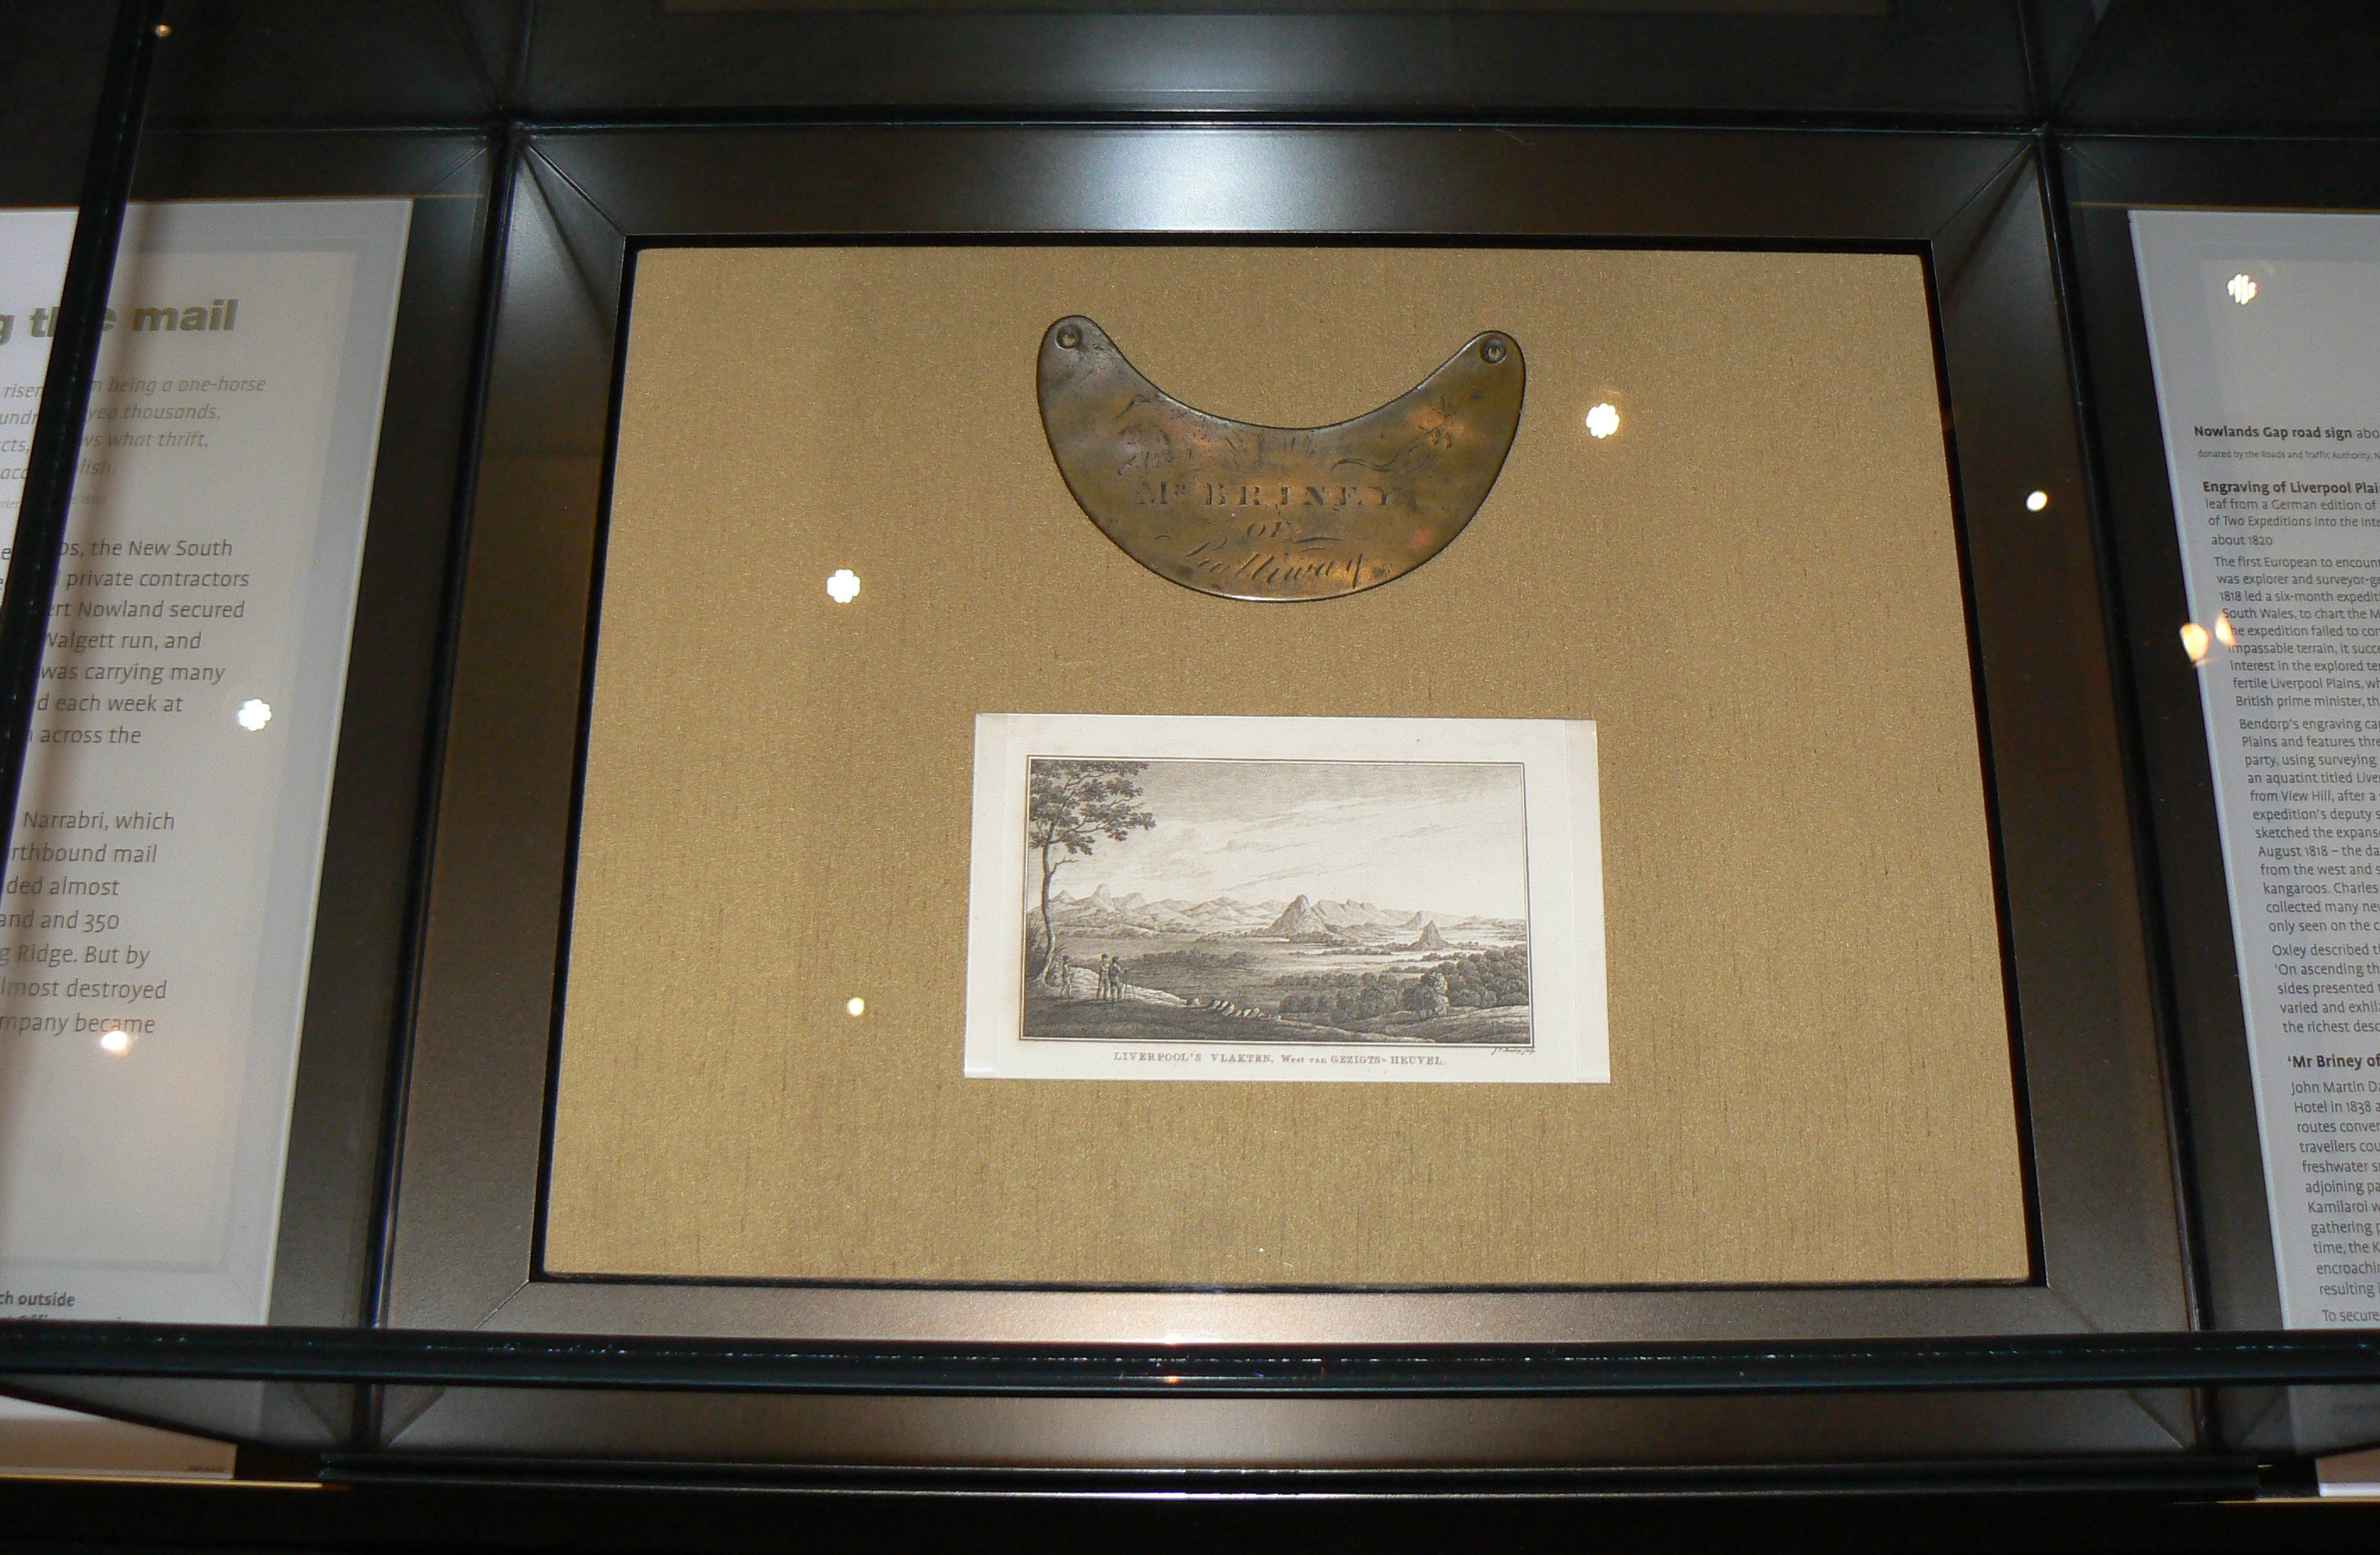 The recently installed breastplate on display alongside an early European engraving of the Liverpool Plains in the Museum’s Landmarks gallery. Photo by Karolina Kilian, National Museum of Australia